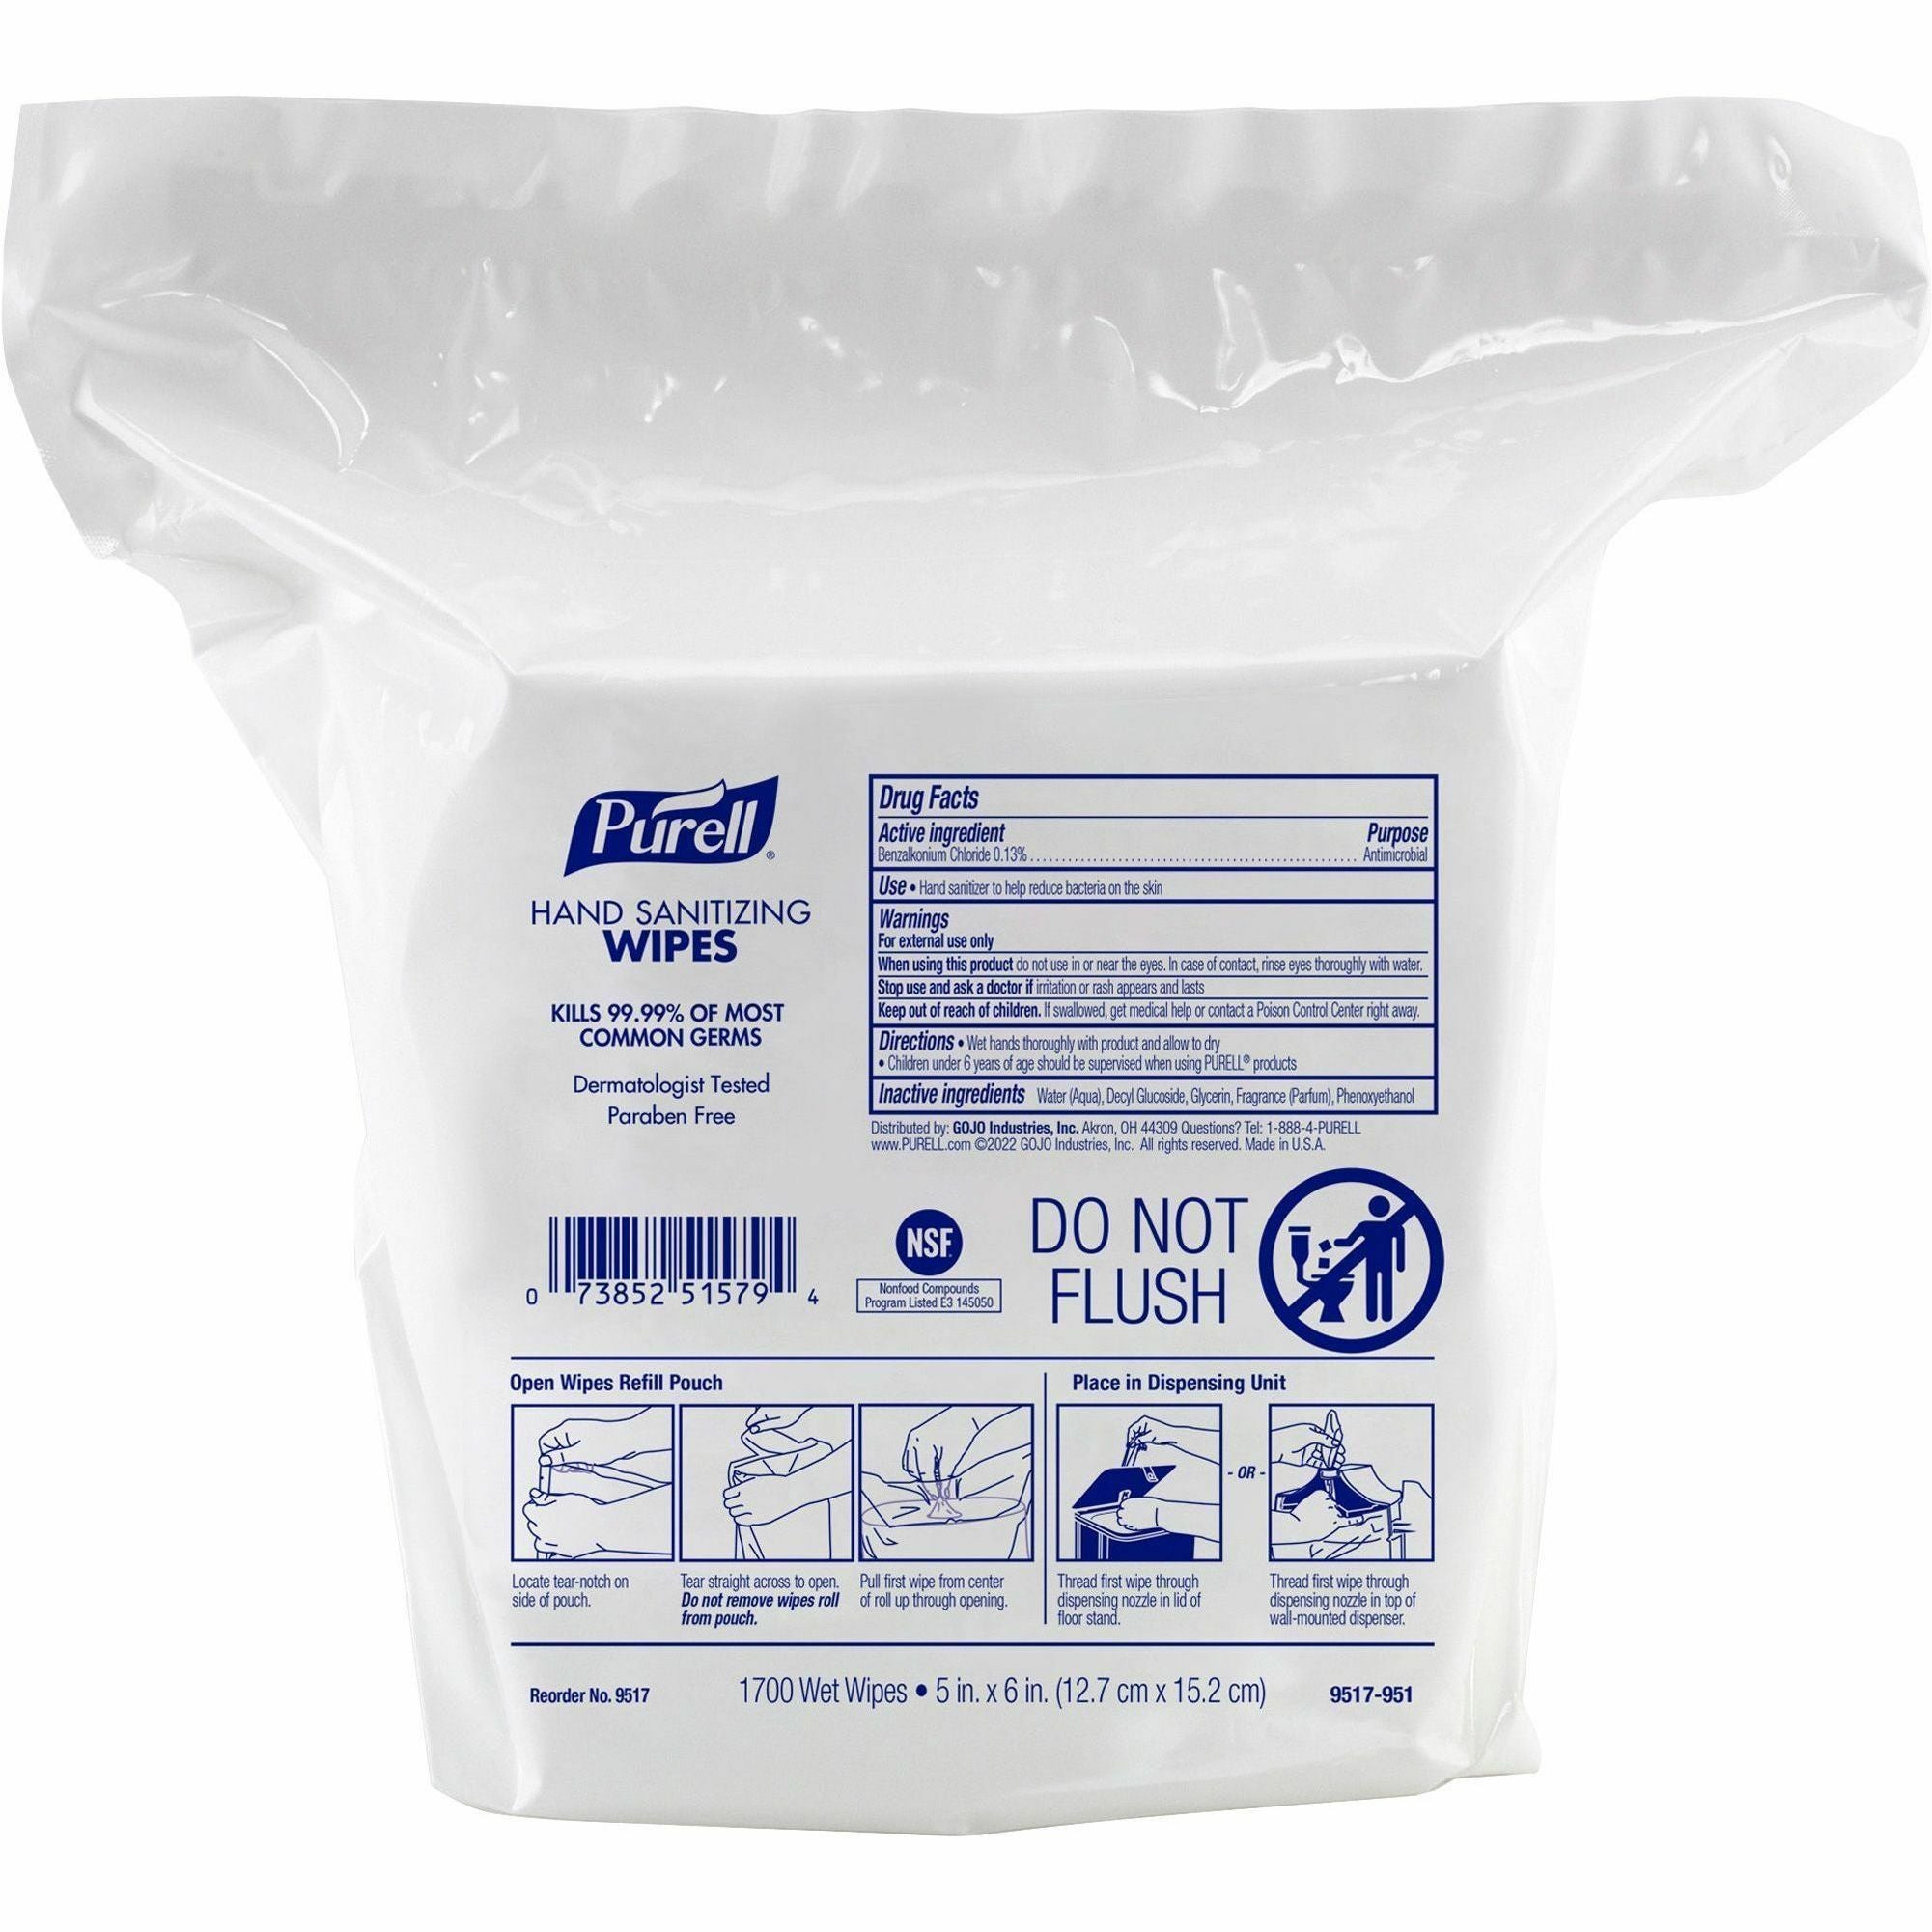 purell-refill-pouch-hand-sanitizing-wipes-5-x-6-1700-sheets-white-alcohol-free-durable-for-hand-food-processor-office-health-club-grocery-store-per-pouch-4-carton_goj951704 - 2